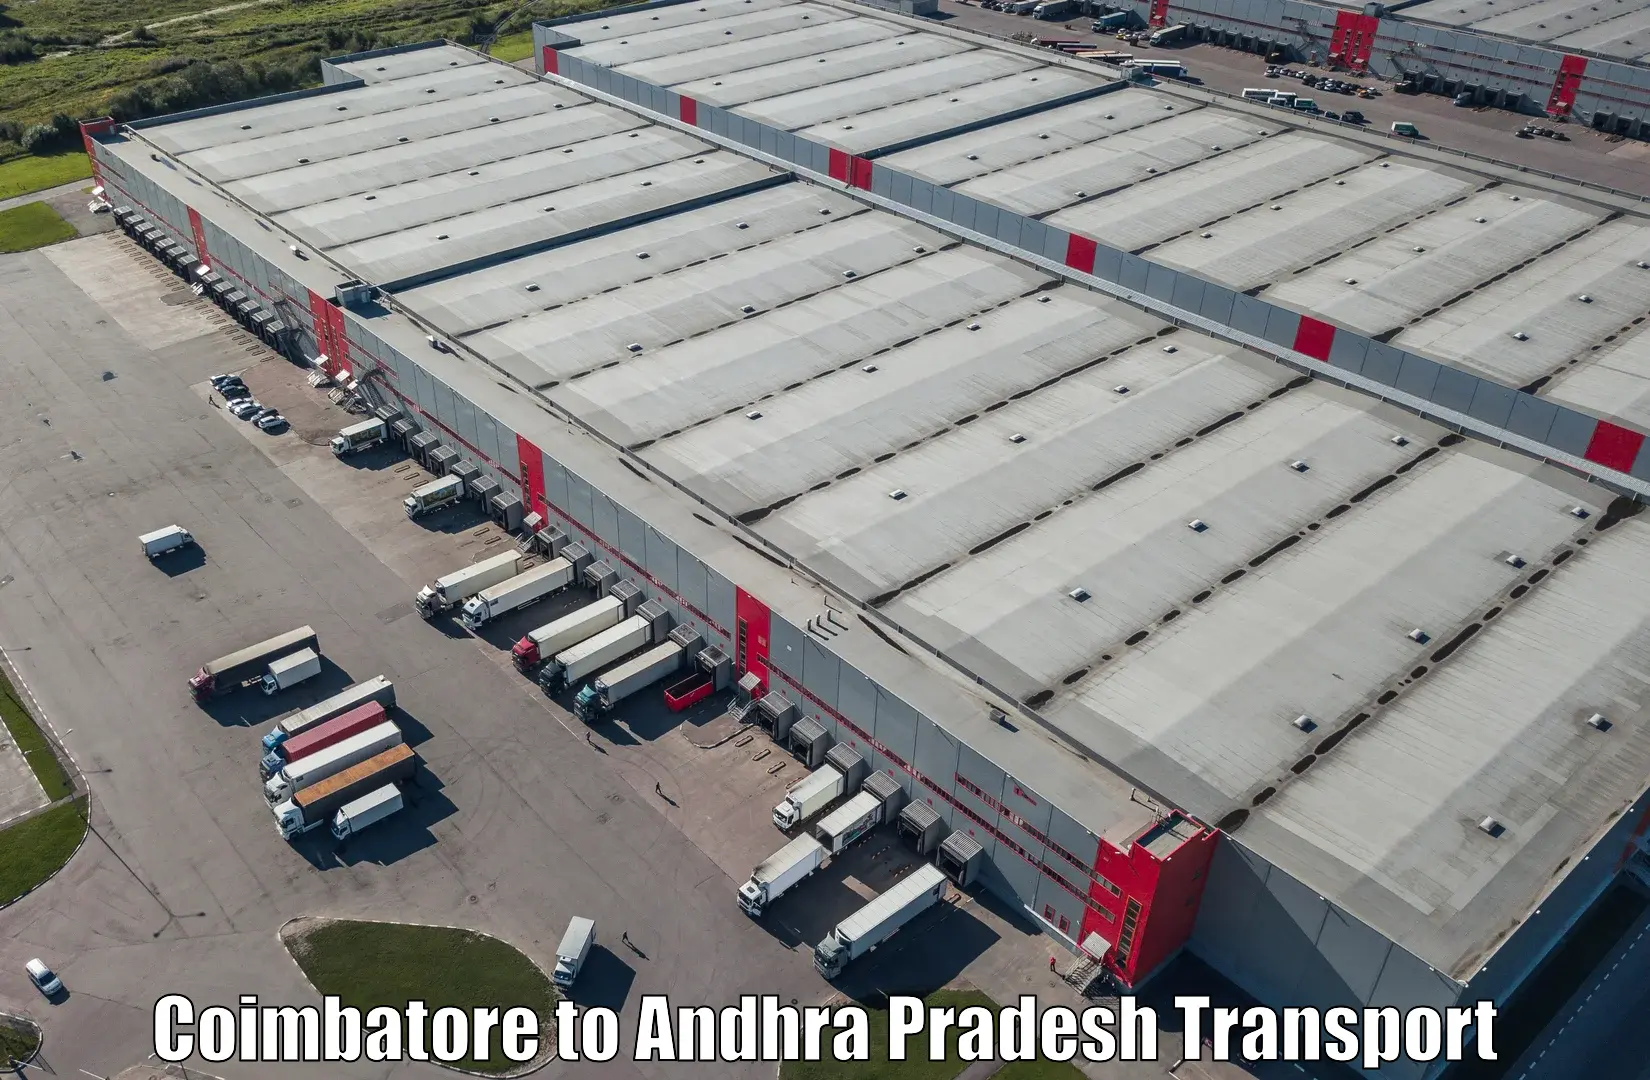 Express transport services in Coimbatore to Cuddapah